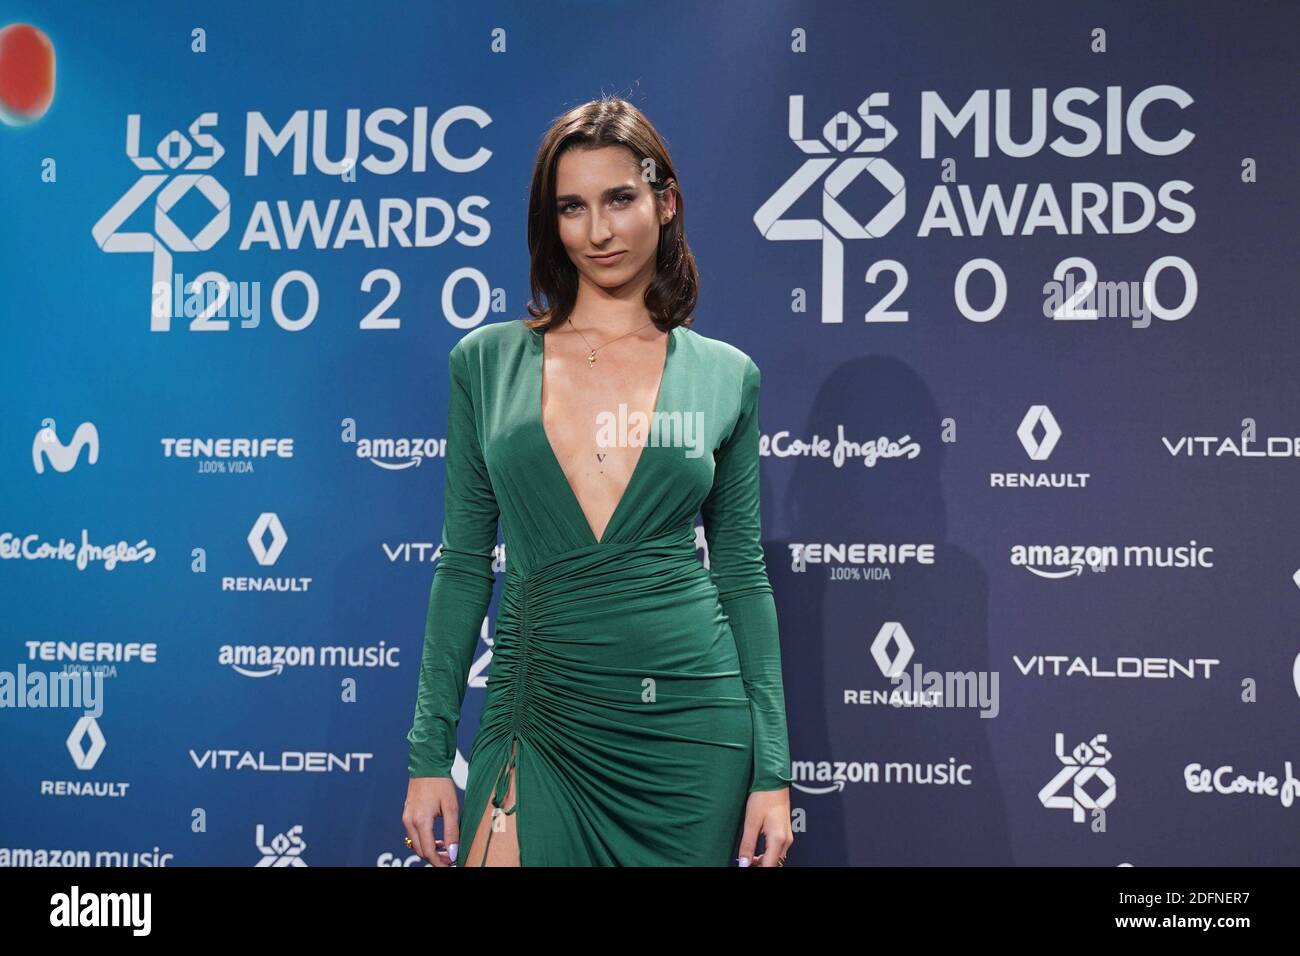 Lola Rodriguez at photocall for 40 Principales awards in Madrid on Saturday  05 December 2020. Cordon Press Stock Photo - Alamy